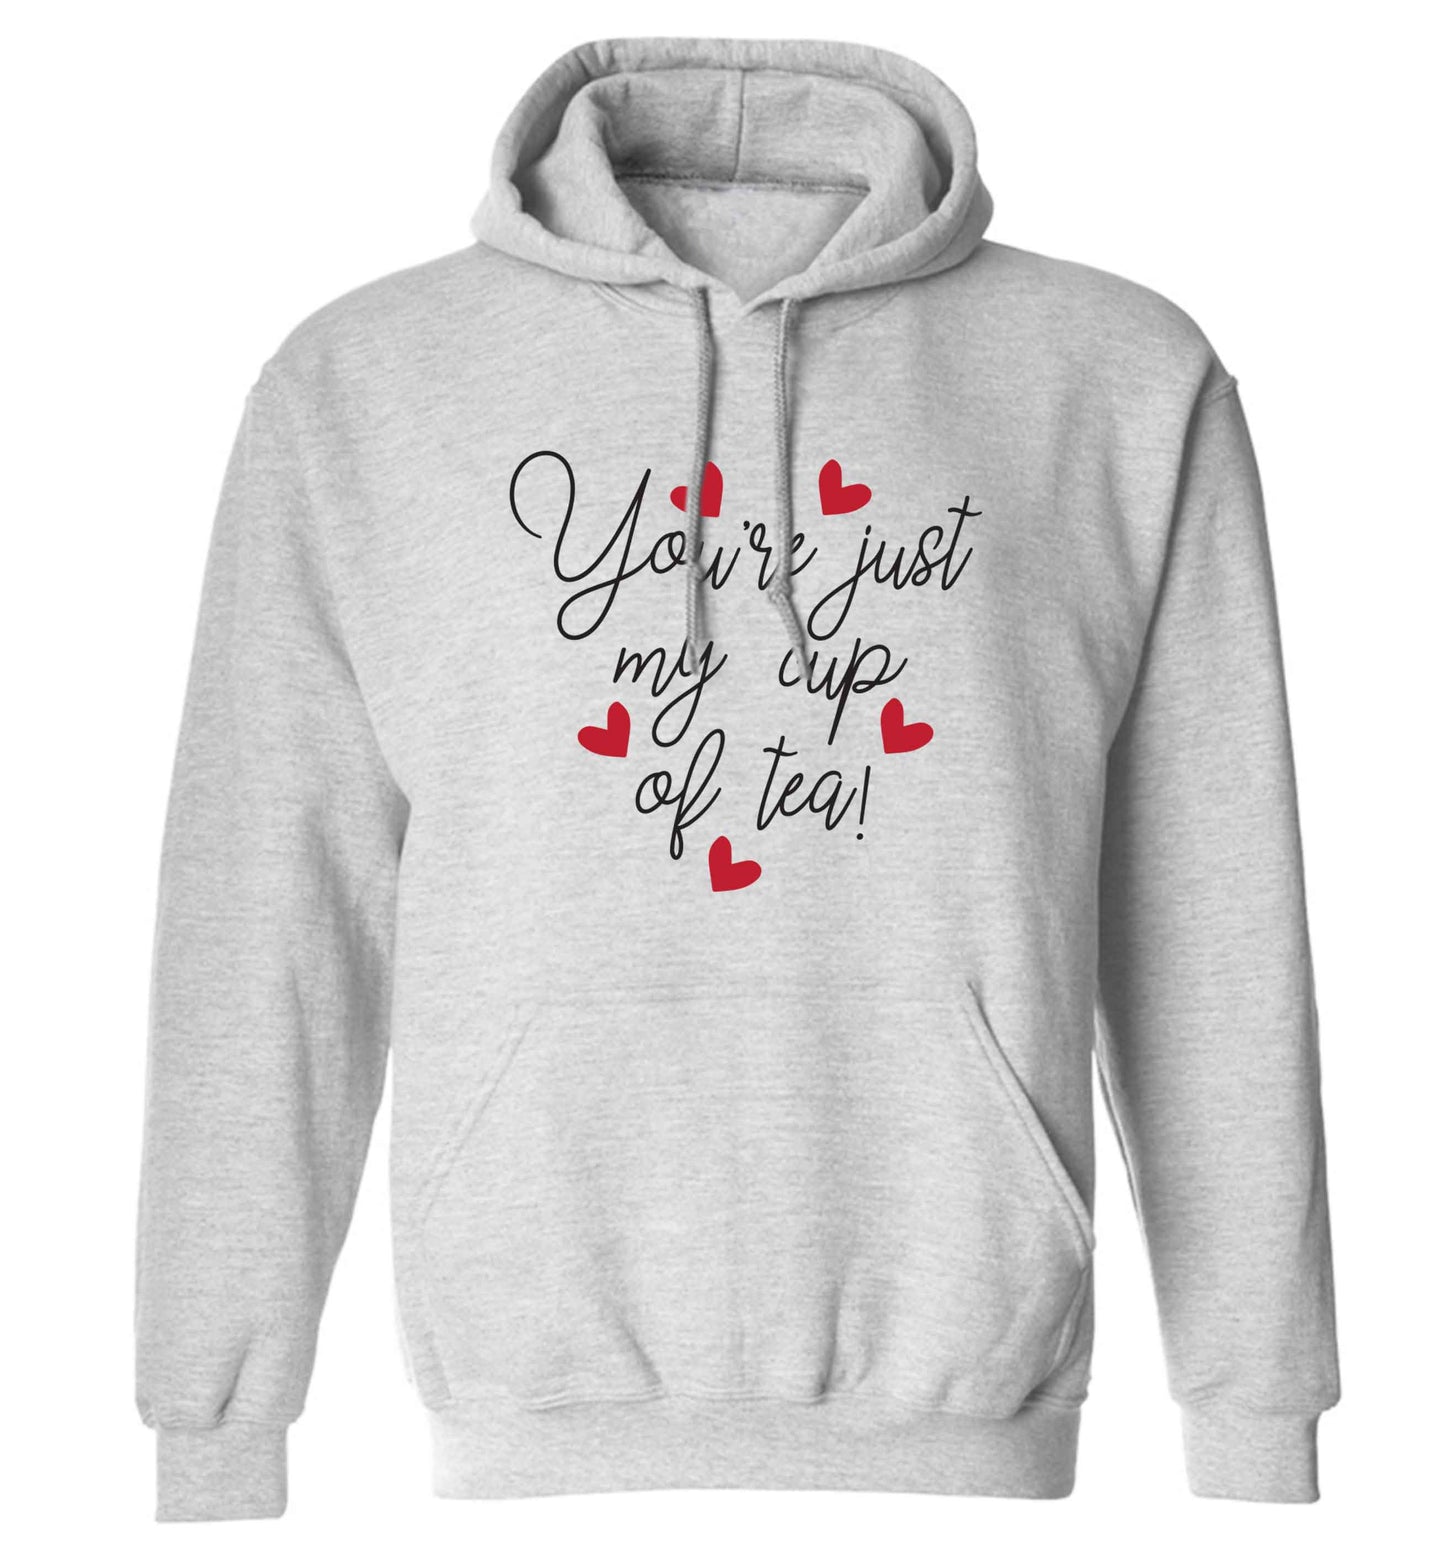 You're just my cup of tea adults unisex grey hoodie 2XL